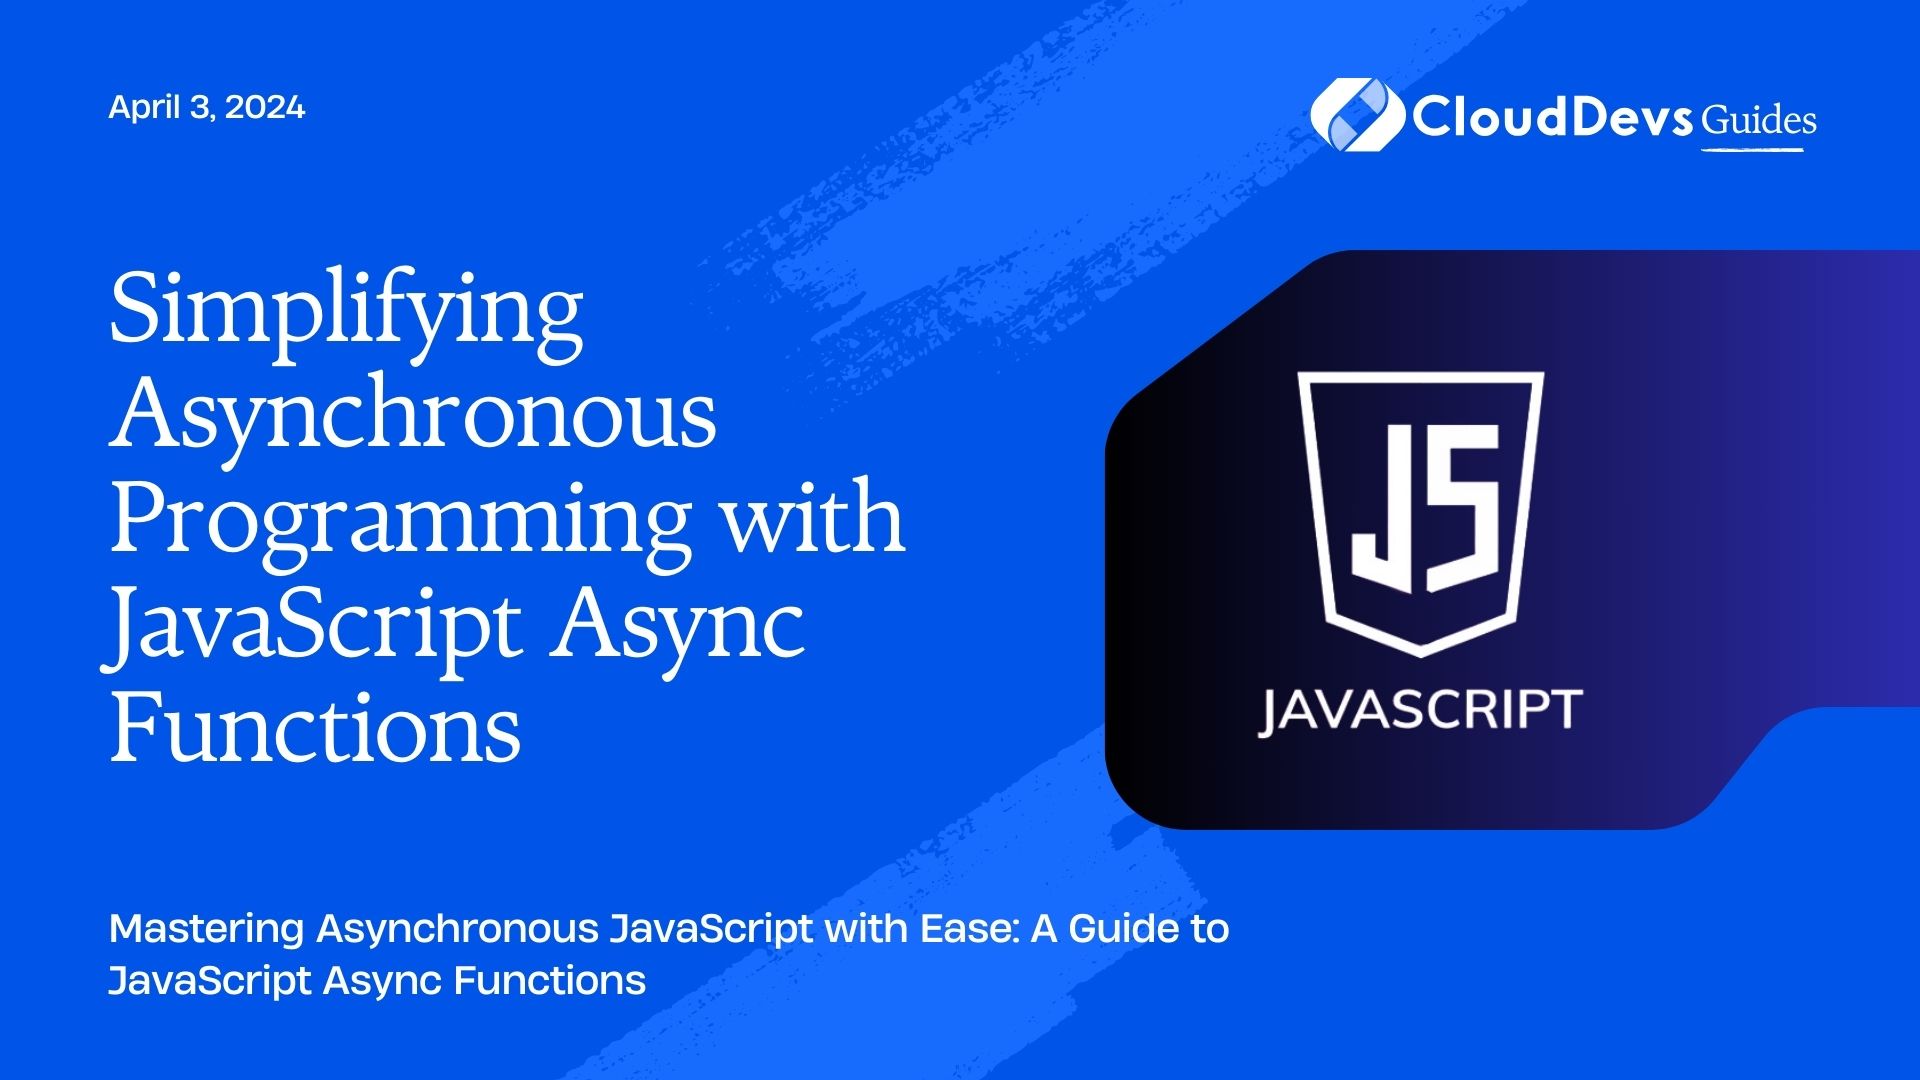 Simplifying Asynchronous Programming with JavaScript Async Functions